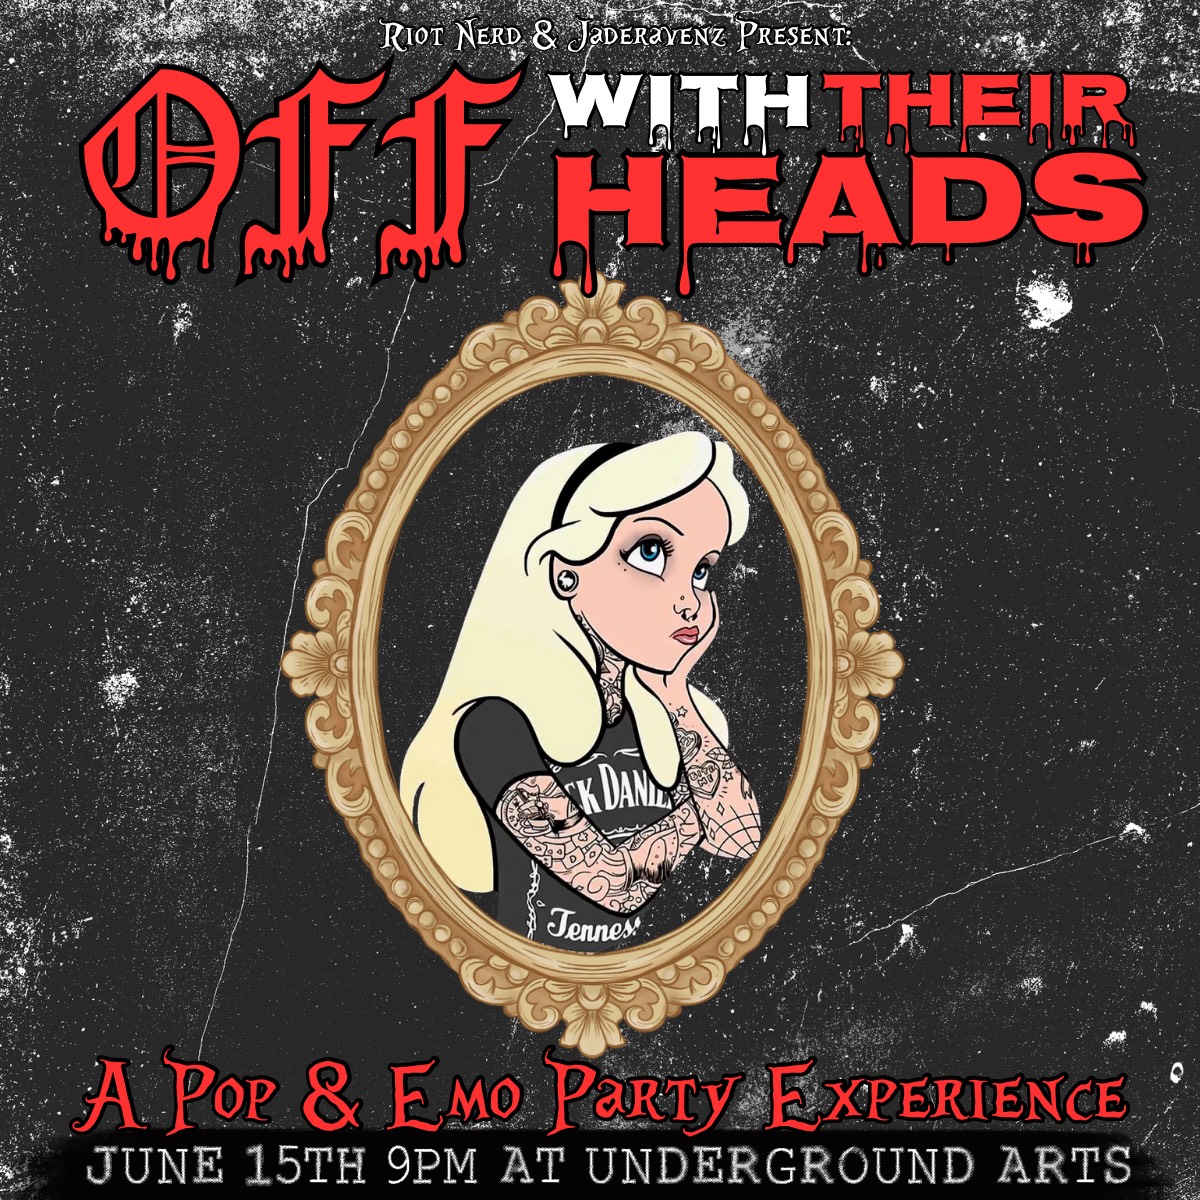 **Just Announced** Riot Nerd & JadeRavenz are running back OFF WITH THEIR HEADS - a Pop & Emo Party Experience right here on June 15 🖤🎶🍵 - Tickets on sale now > link.dice.fm/OWTH_UA